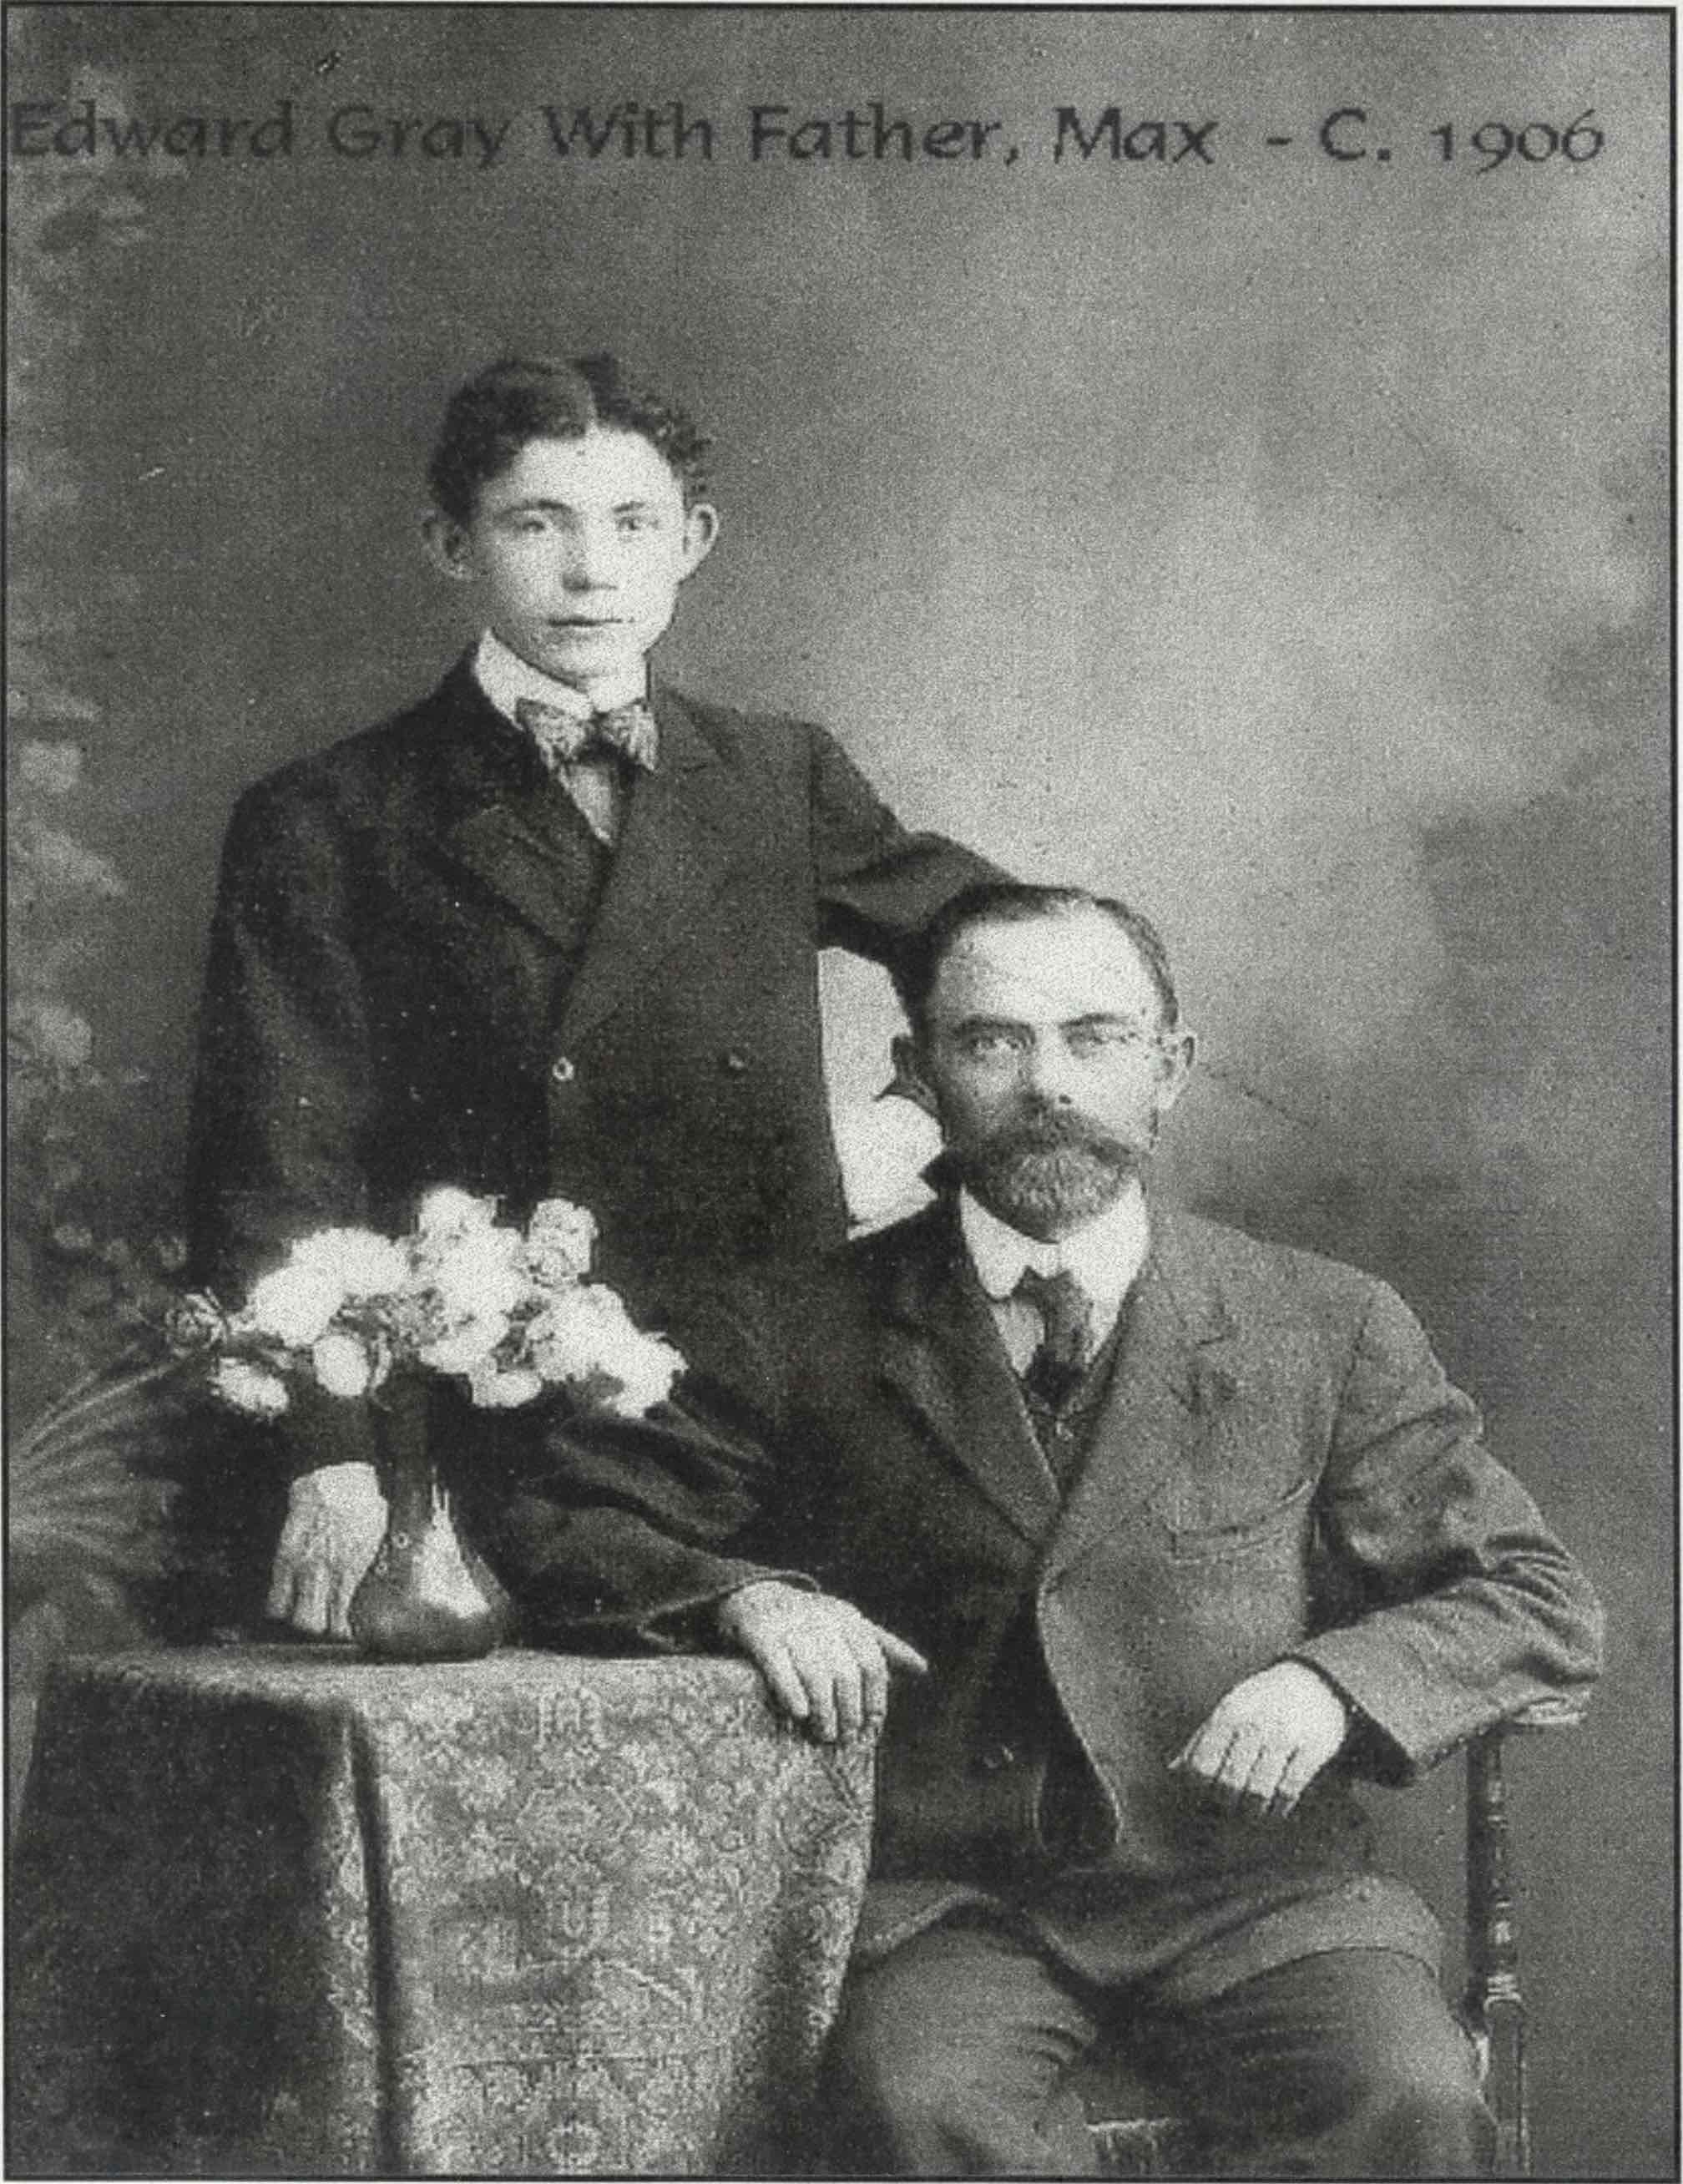 Edward with his father Max c. 1906